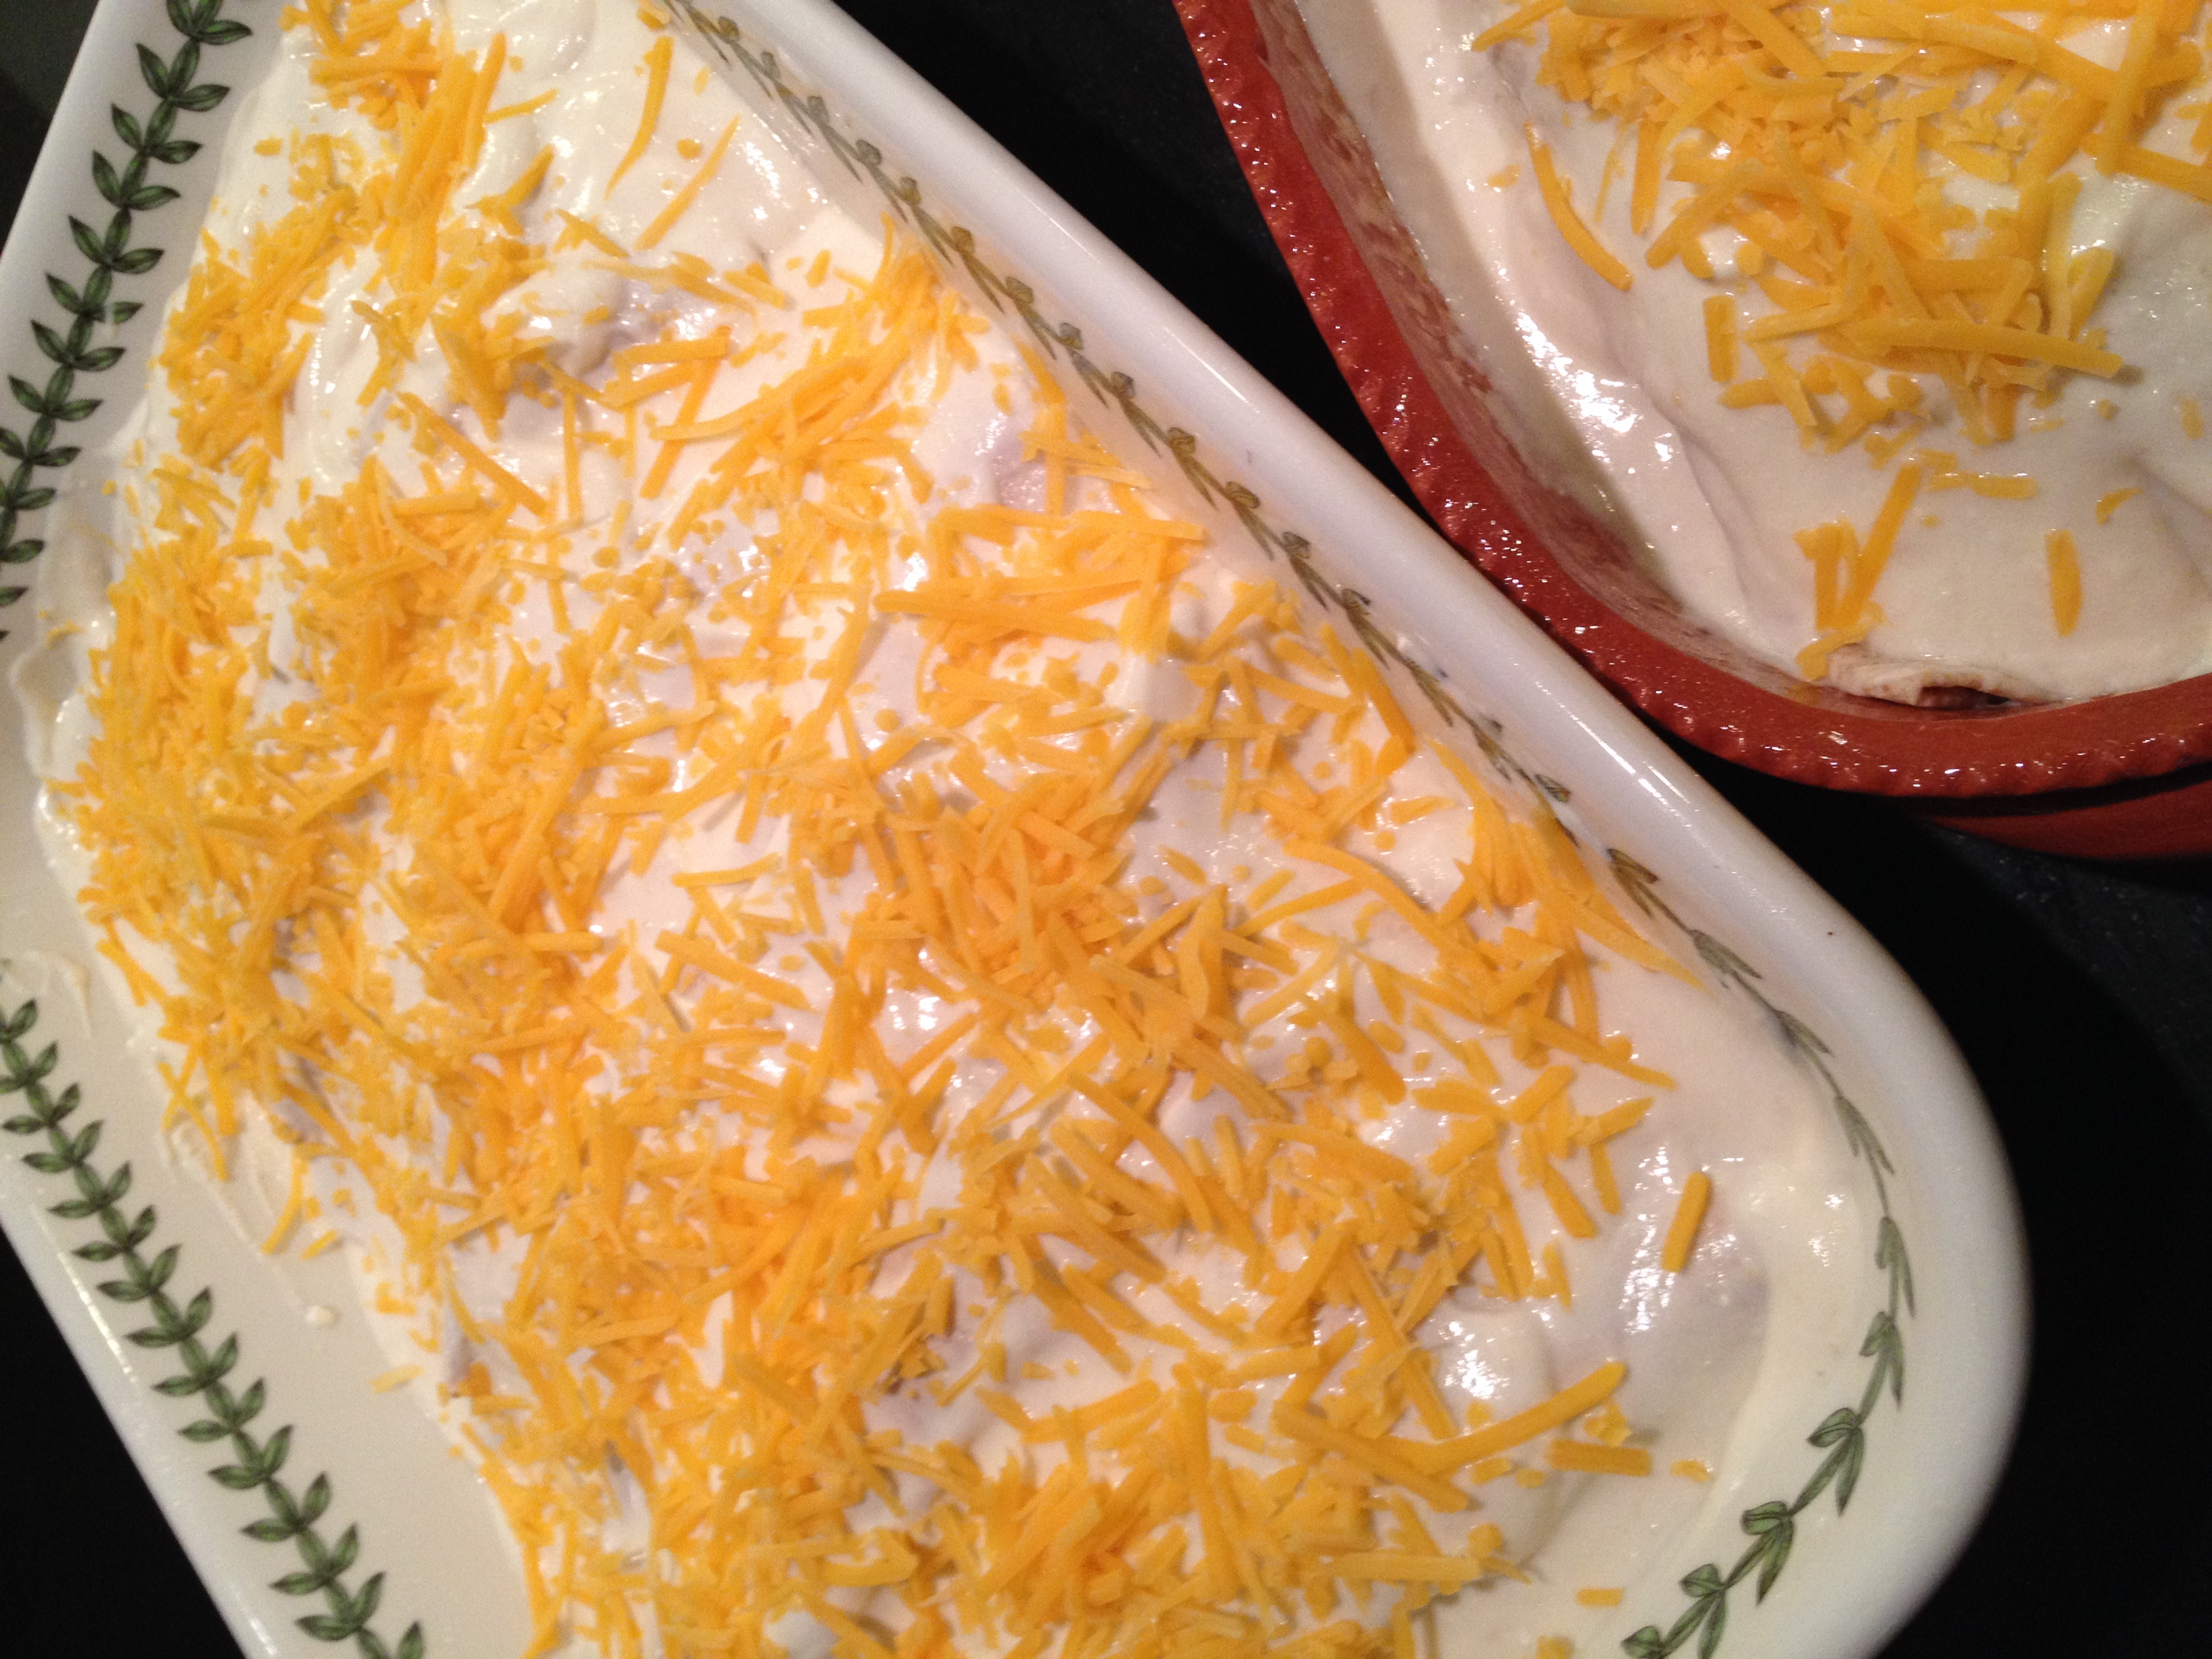 Sprinkle cheese on top- ready for baking